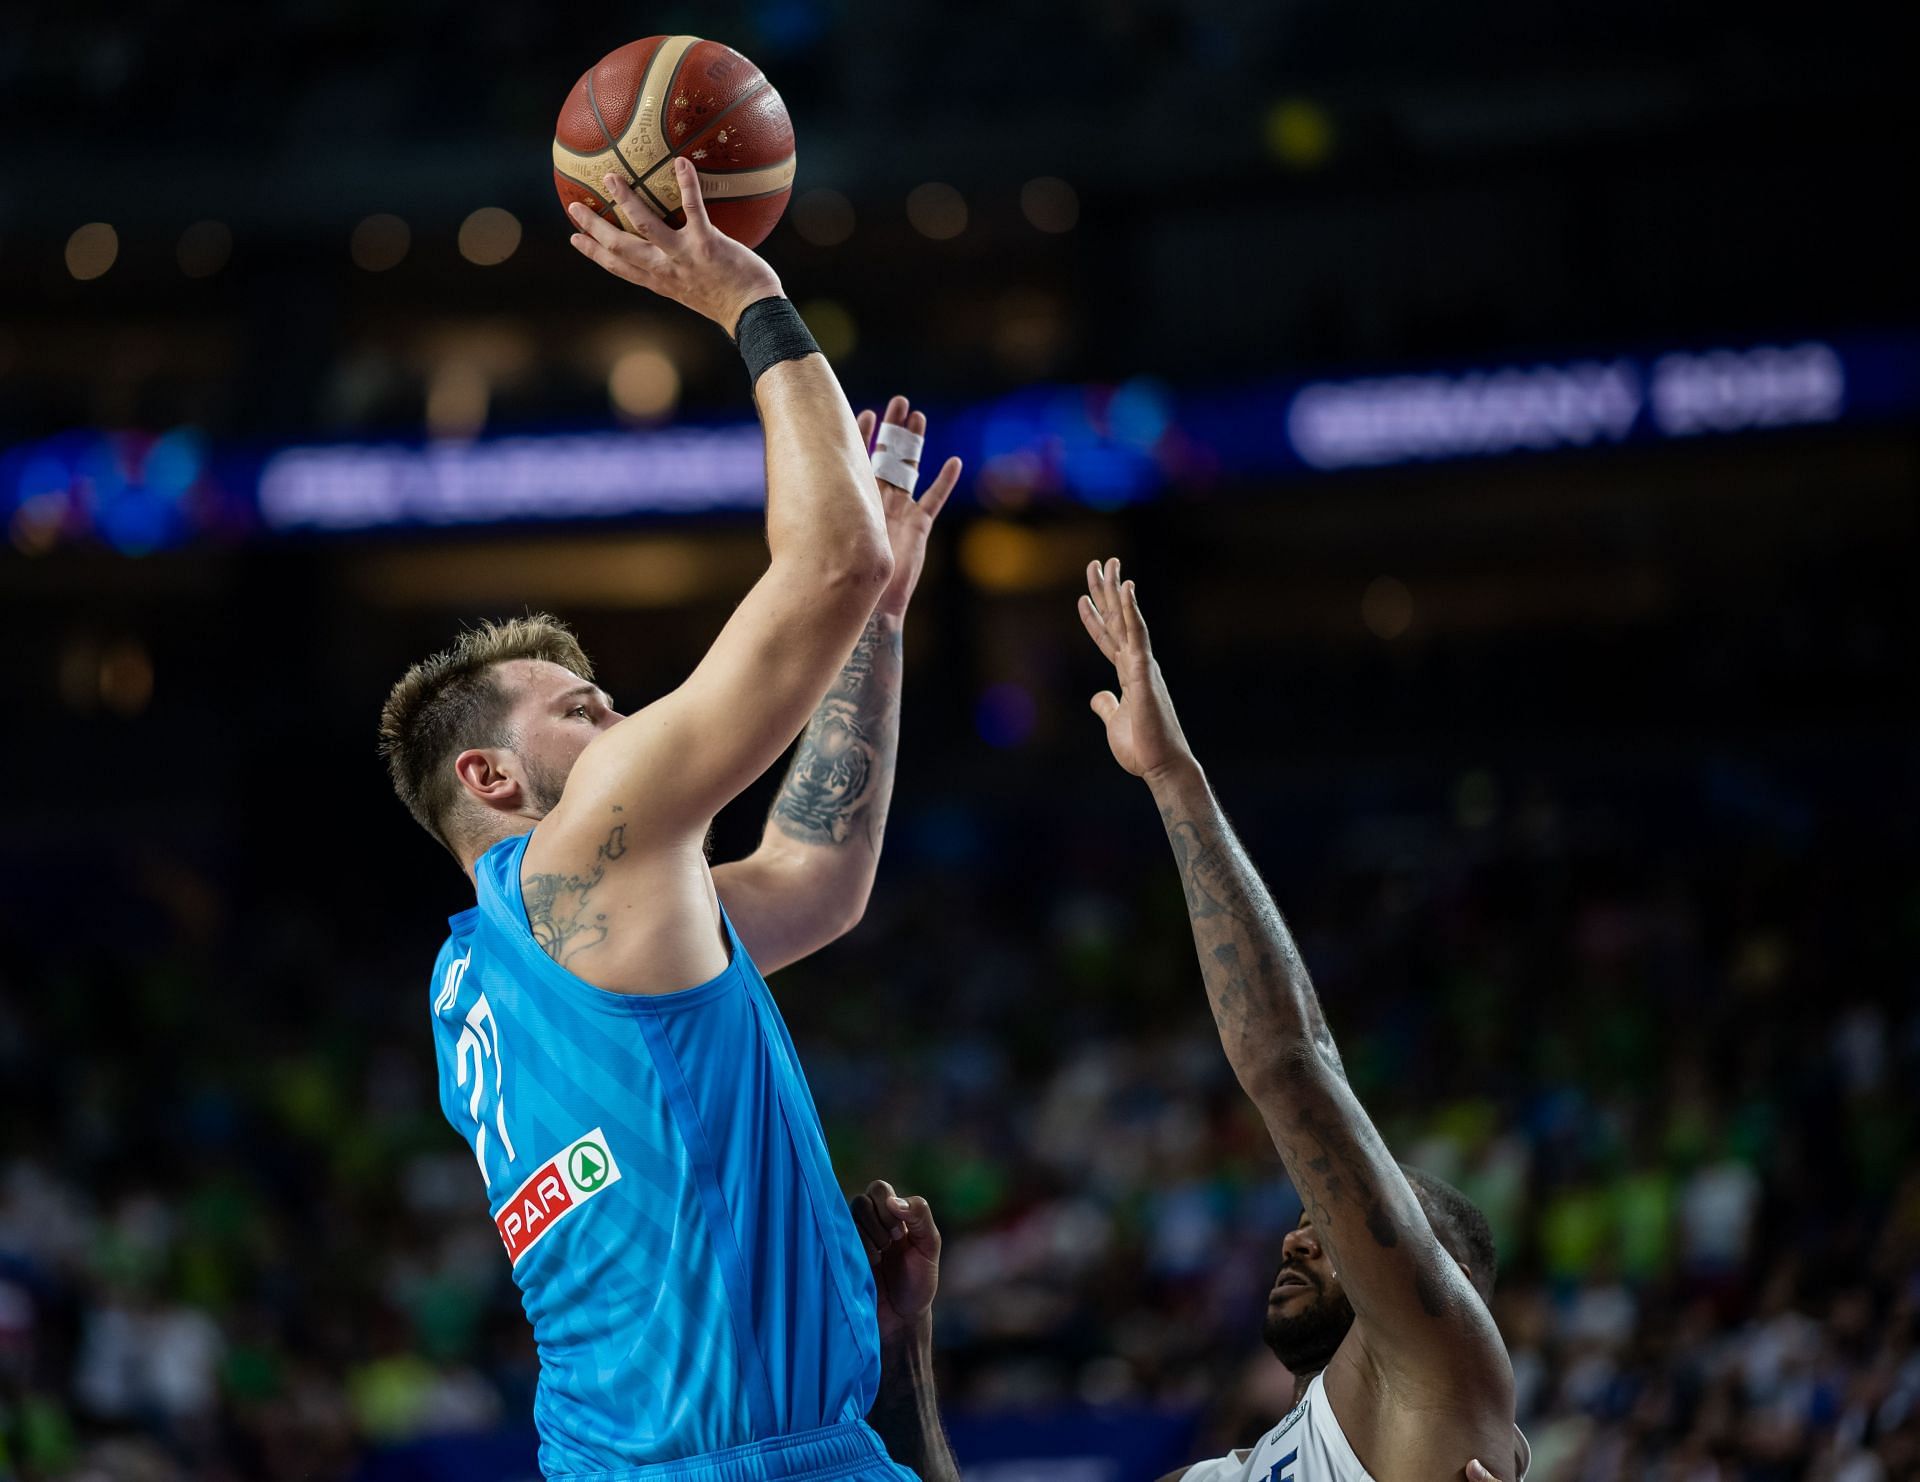 Luka Doncic led Slovenia to a win over France.